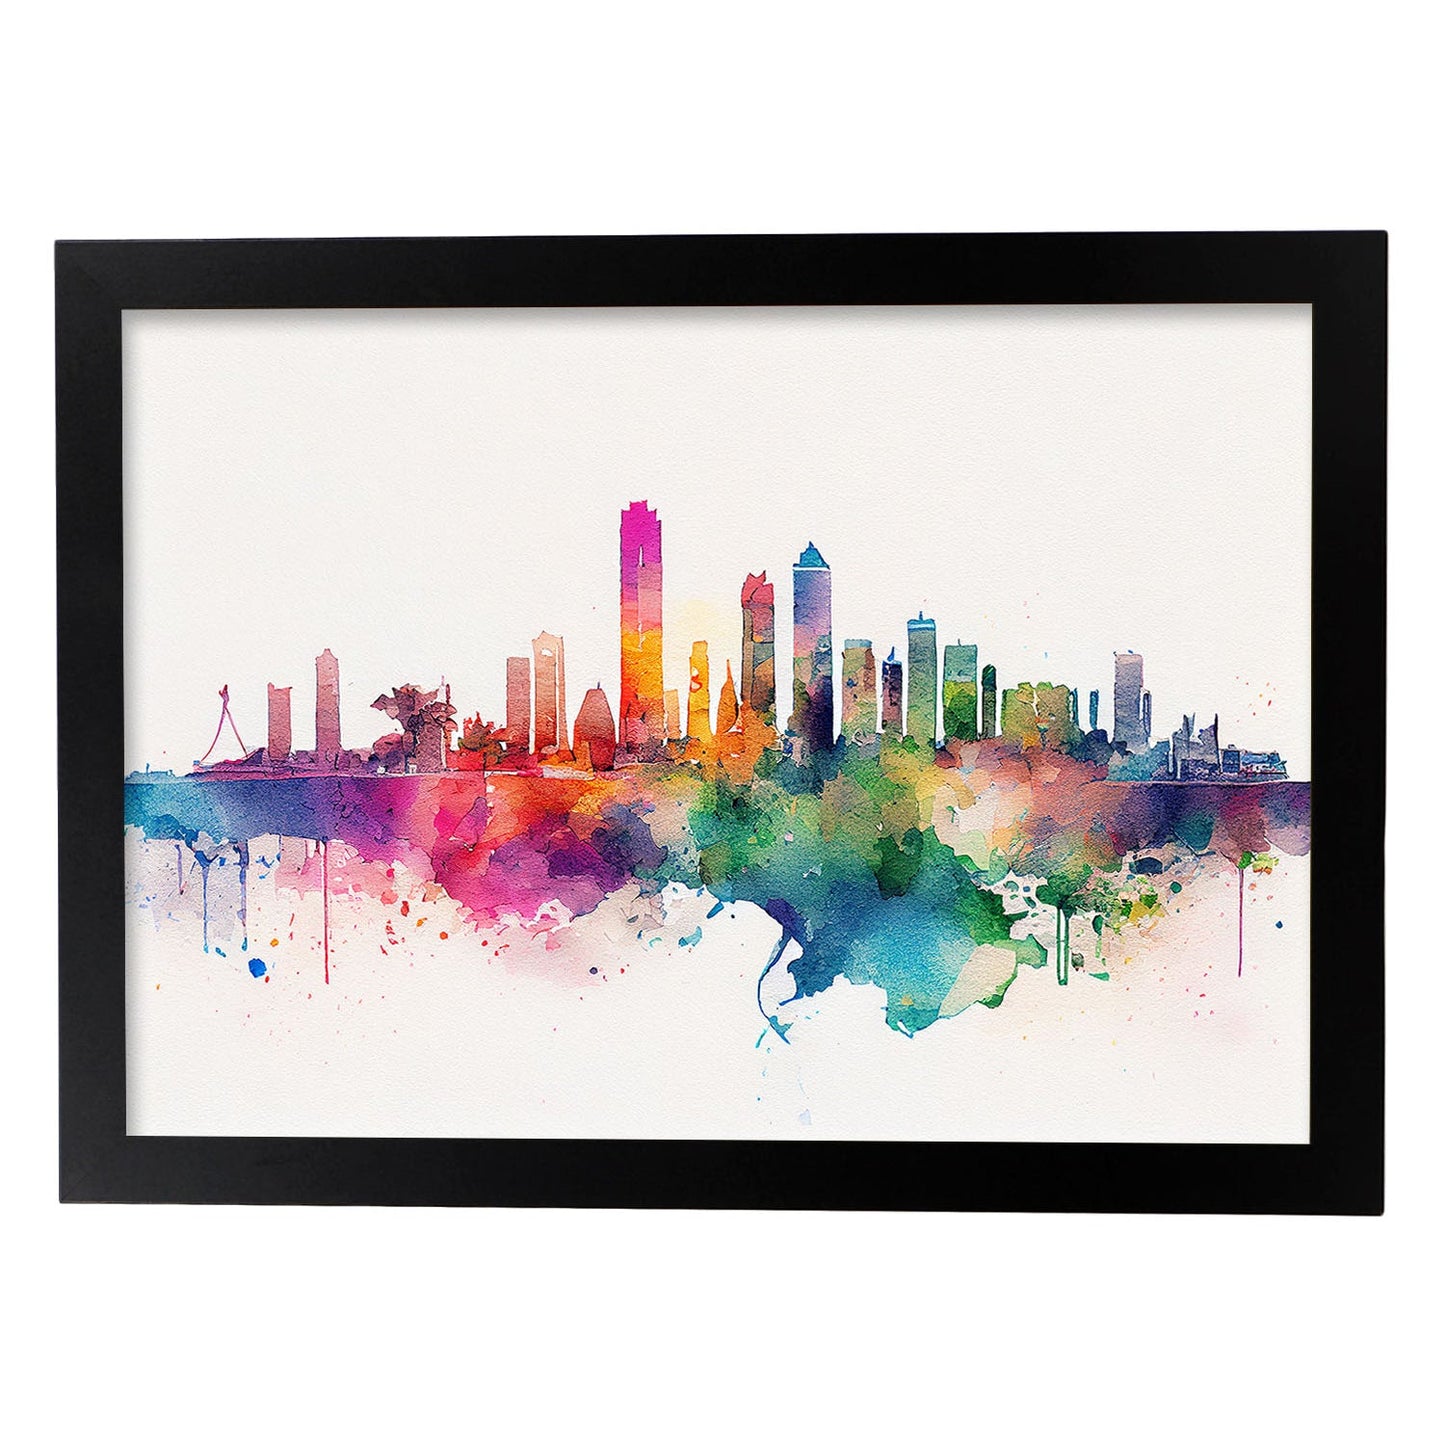 Nacnic watercolor of a skyline of the city of Tel Aviv_1. Aesthetic Wall Art Prints for Bedroom or Living Room Design.